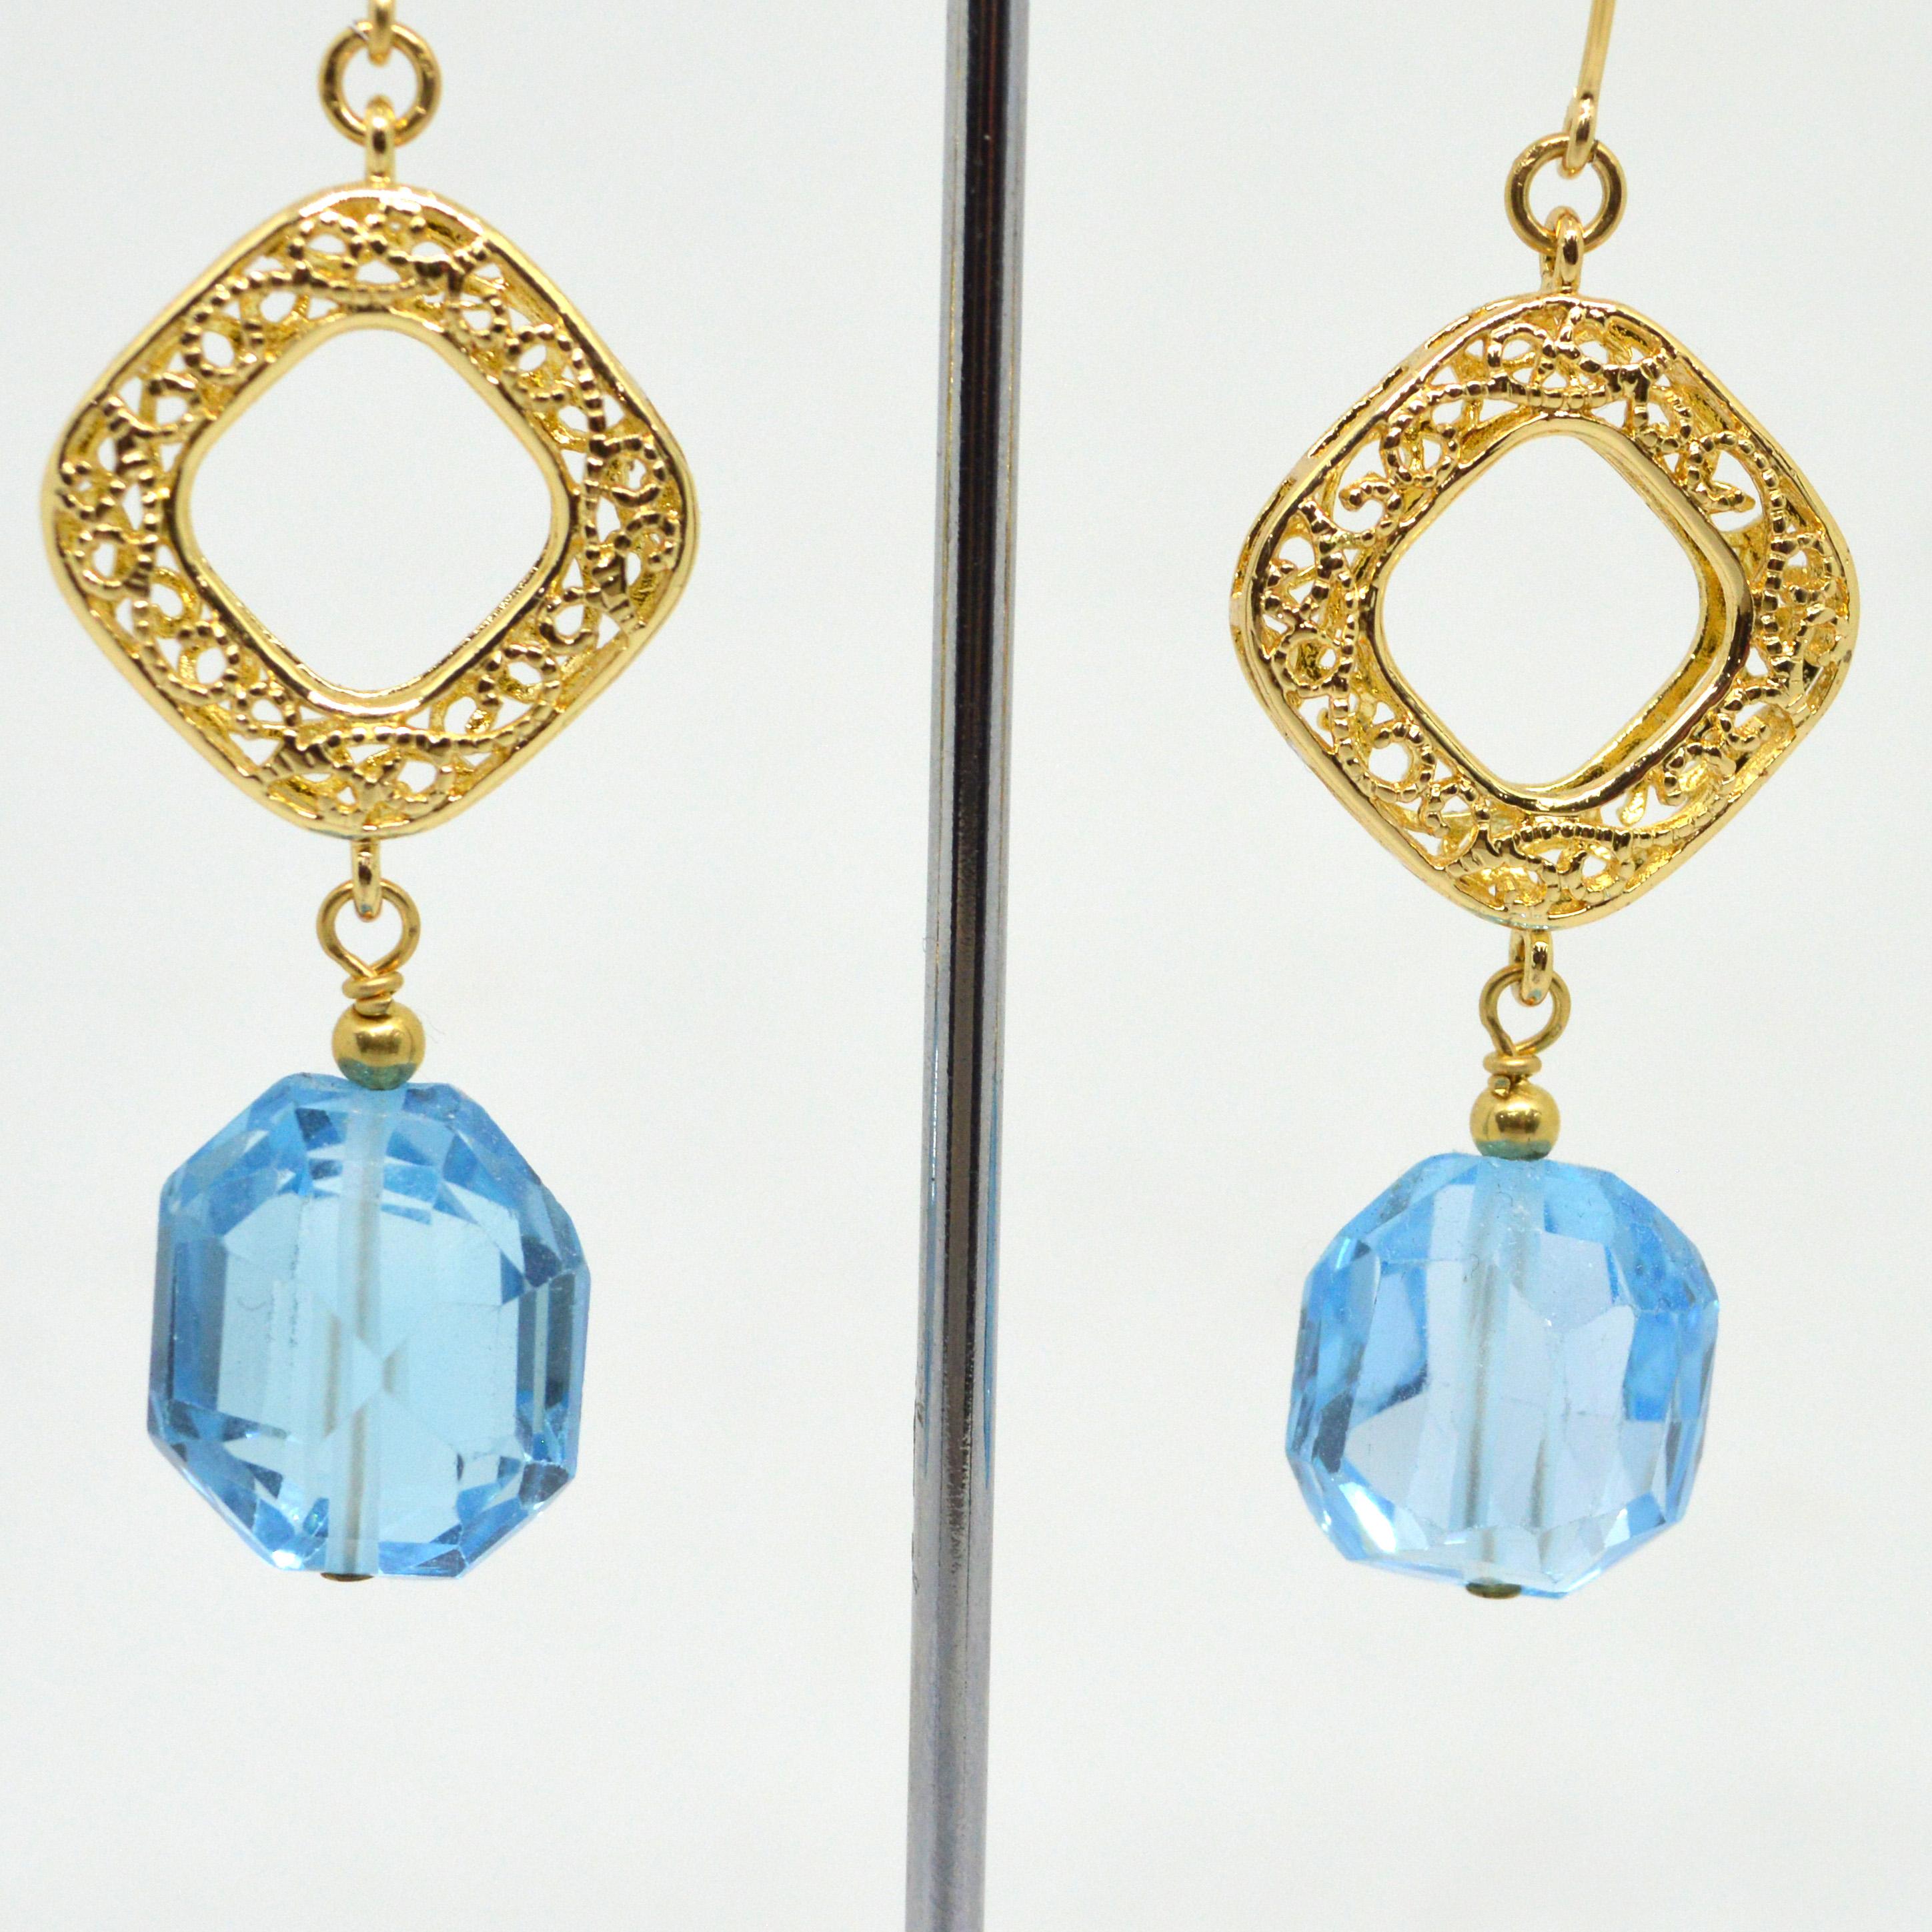  Striking and Beautiful 14ct Gold Filled, Blue Topaz Earrings. 

Description
14ct Gold Filled Wishbone Shephard Hook 32mm
14ct Gold Filled Filigree Connector 20x26mm
Blue Topaz Faceted Nugget 8x12mm
14ct Gold Filled Headpin, Jump lock and 3mm Round